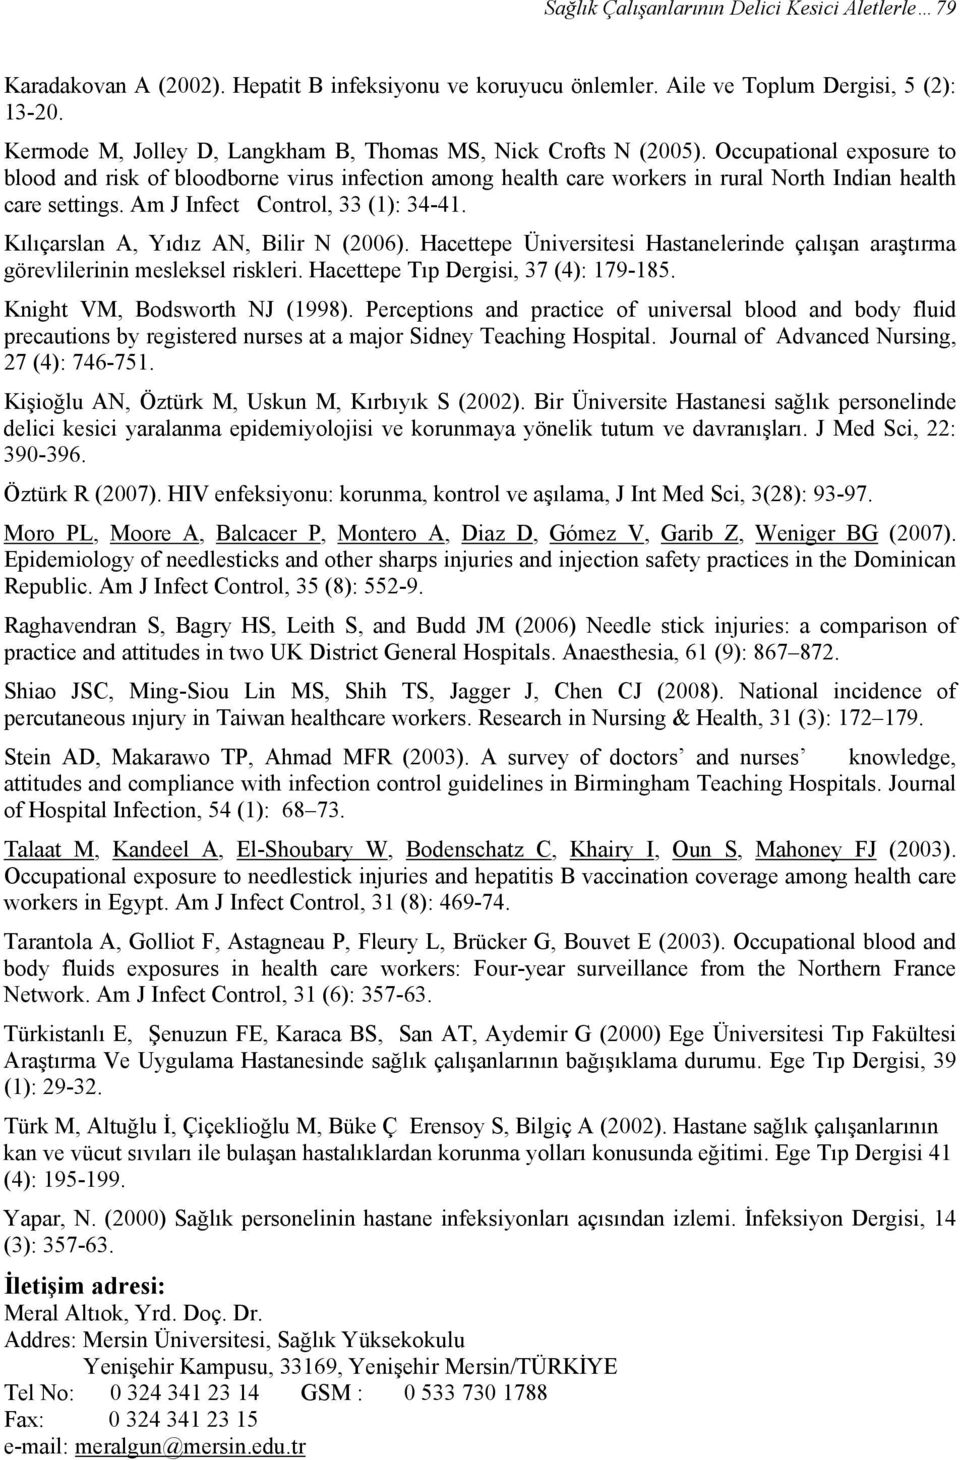 Occupational exposure to blood and risk of bloodborne virus infection among health care workers in rural North Indian health care settings. Am J Infect Control, 33 (1): 34-41.